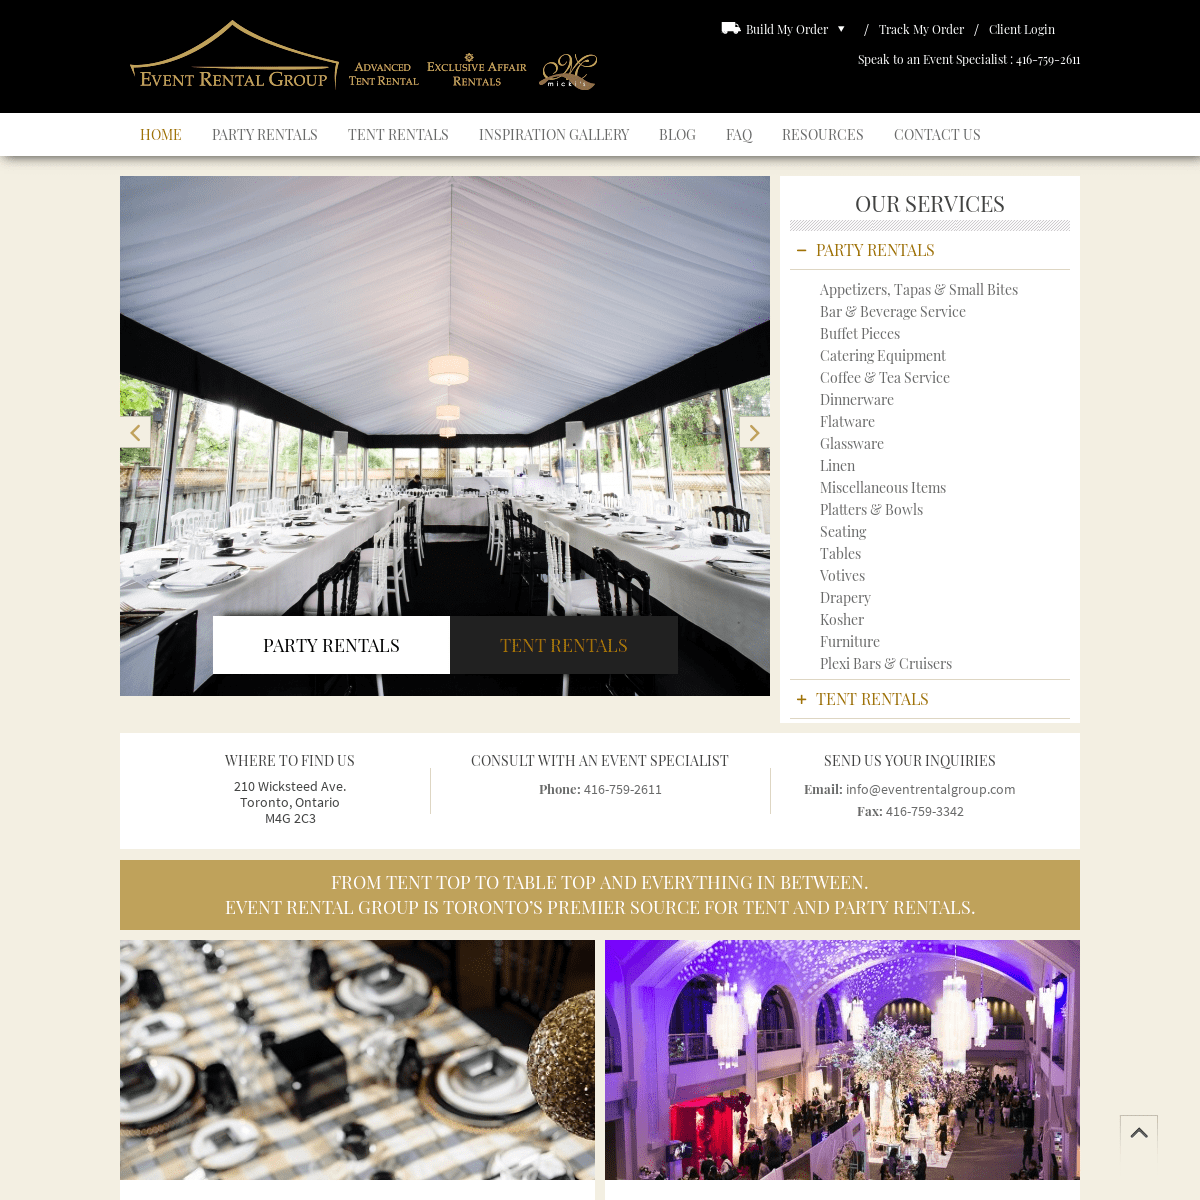 Event Rental Group | Tent, Linen and Party Rentals Toronto, GTA, Ontario